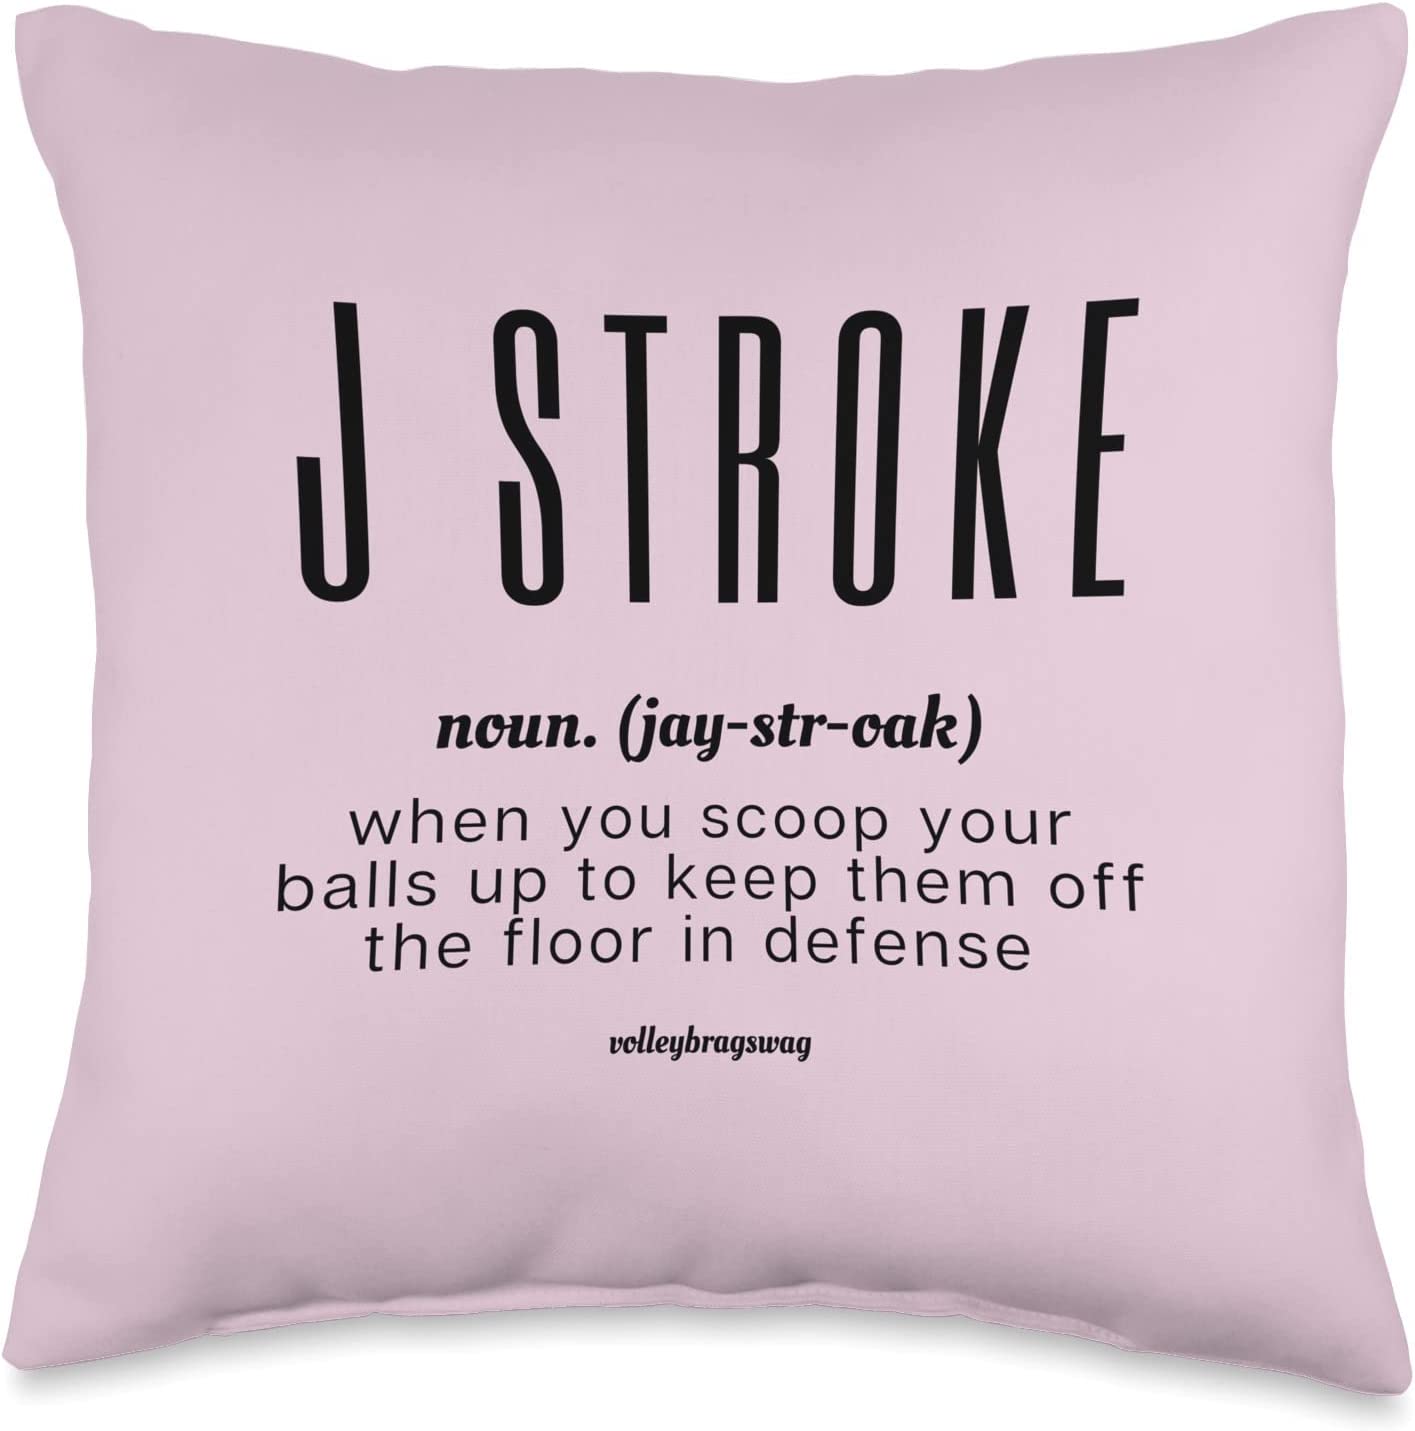 J STROKE (verb) When You Scoop Your Balls Up To keep Them off The Floor in Defense volleyball shirt. April Chapple, Launches a Hilarious Volleyball T-shirt Line With Fun Tongue-in-Cheek Designs sure to make players and enthusiasts laugh.